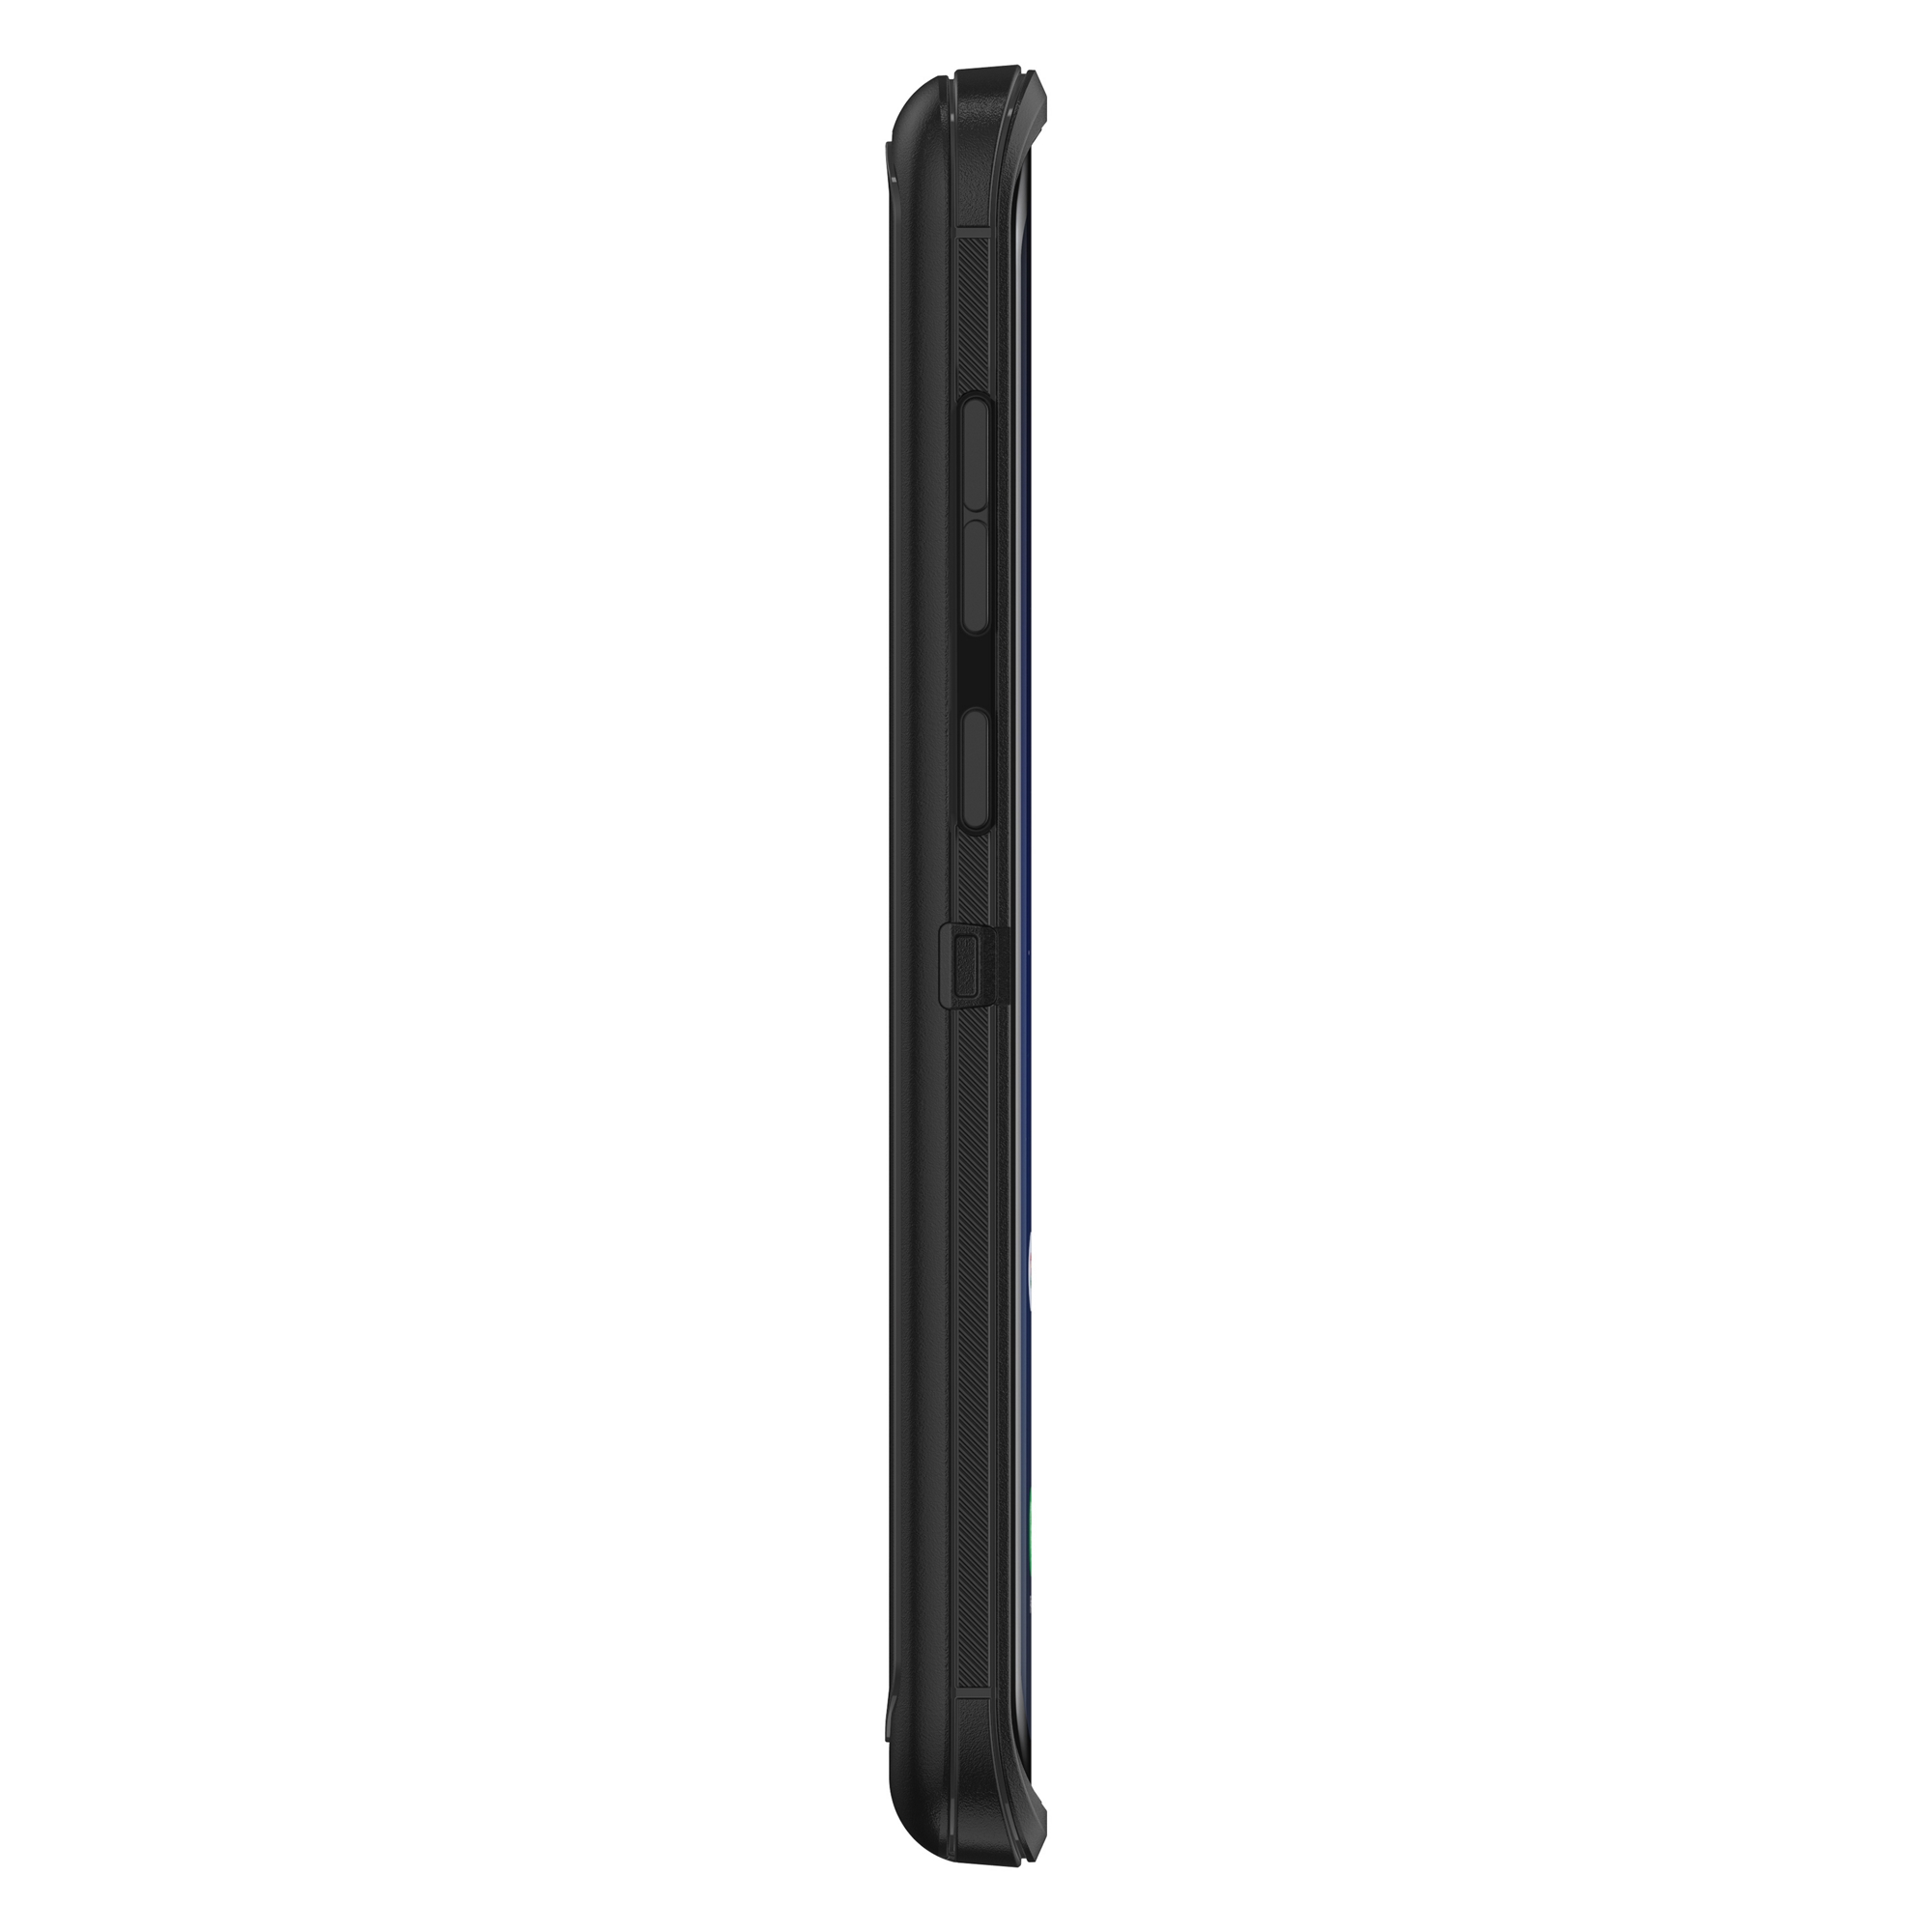 Thumbnail image of OtterBox Defender for Galaxy S8+, Black